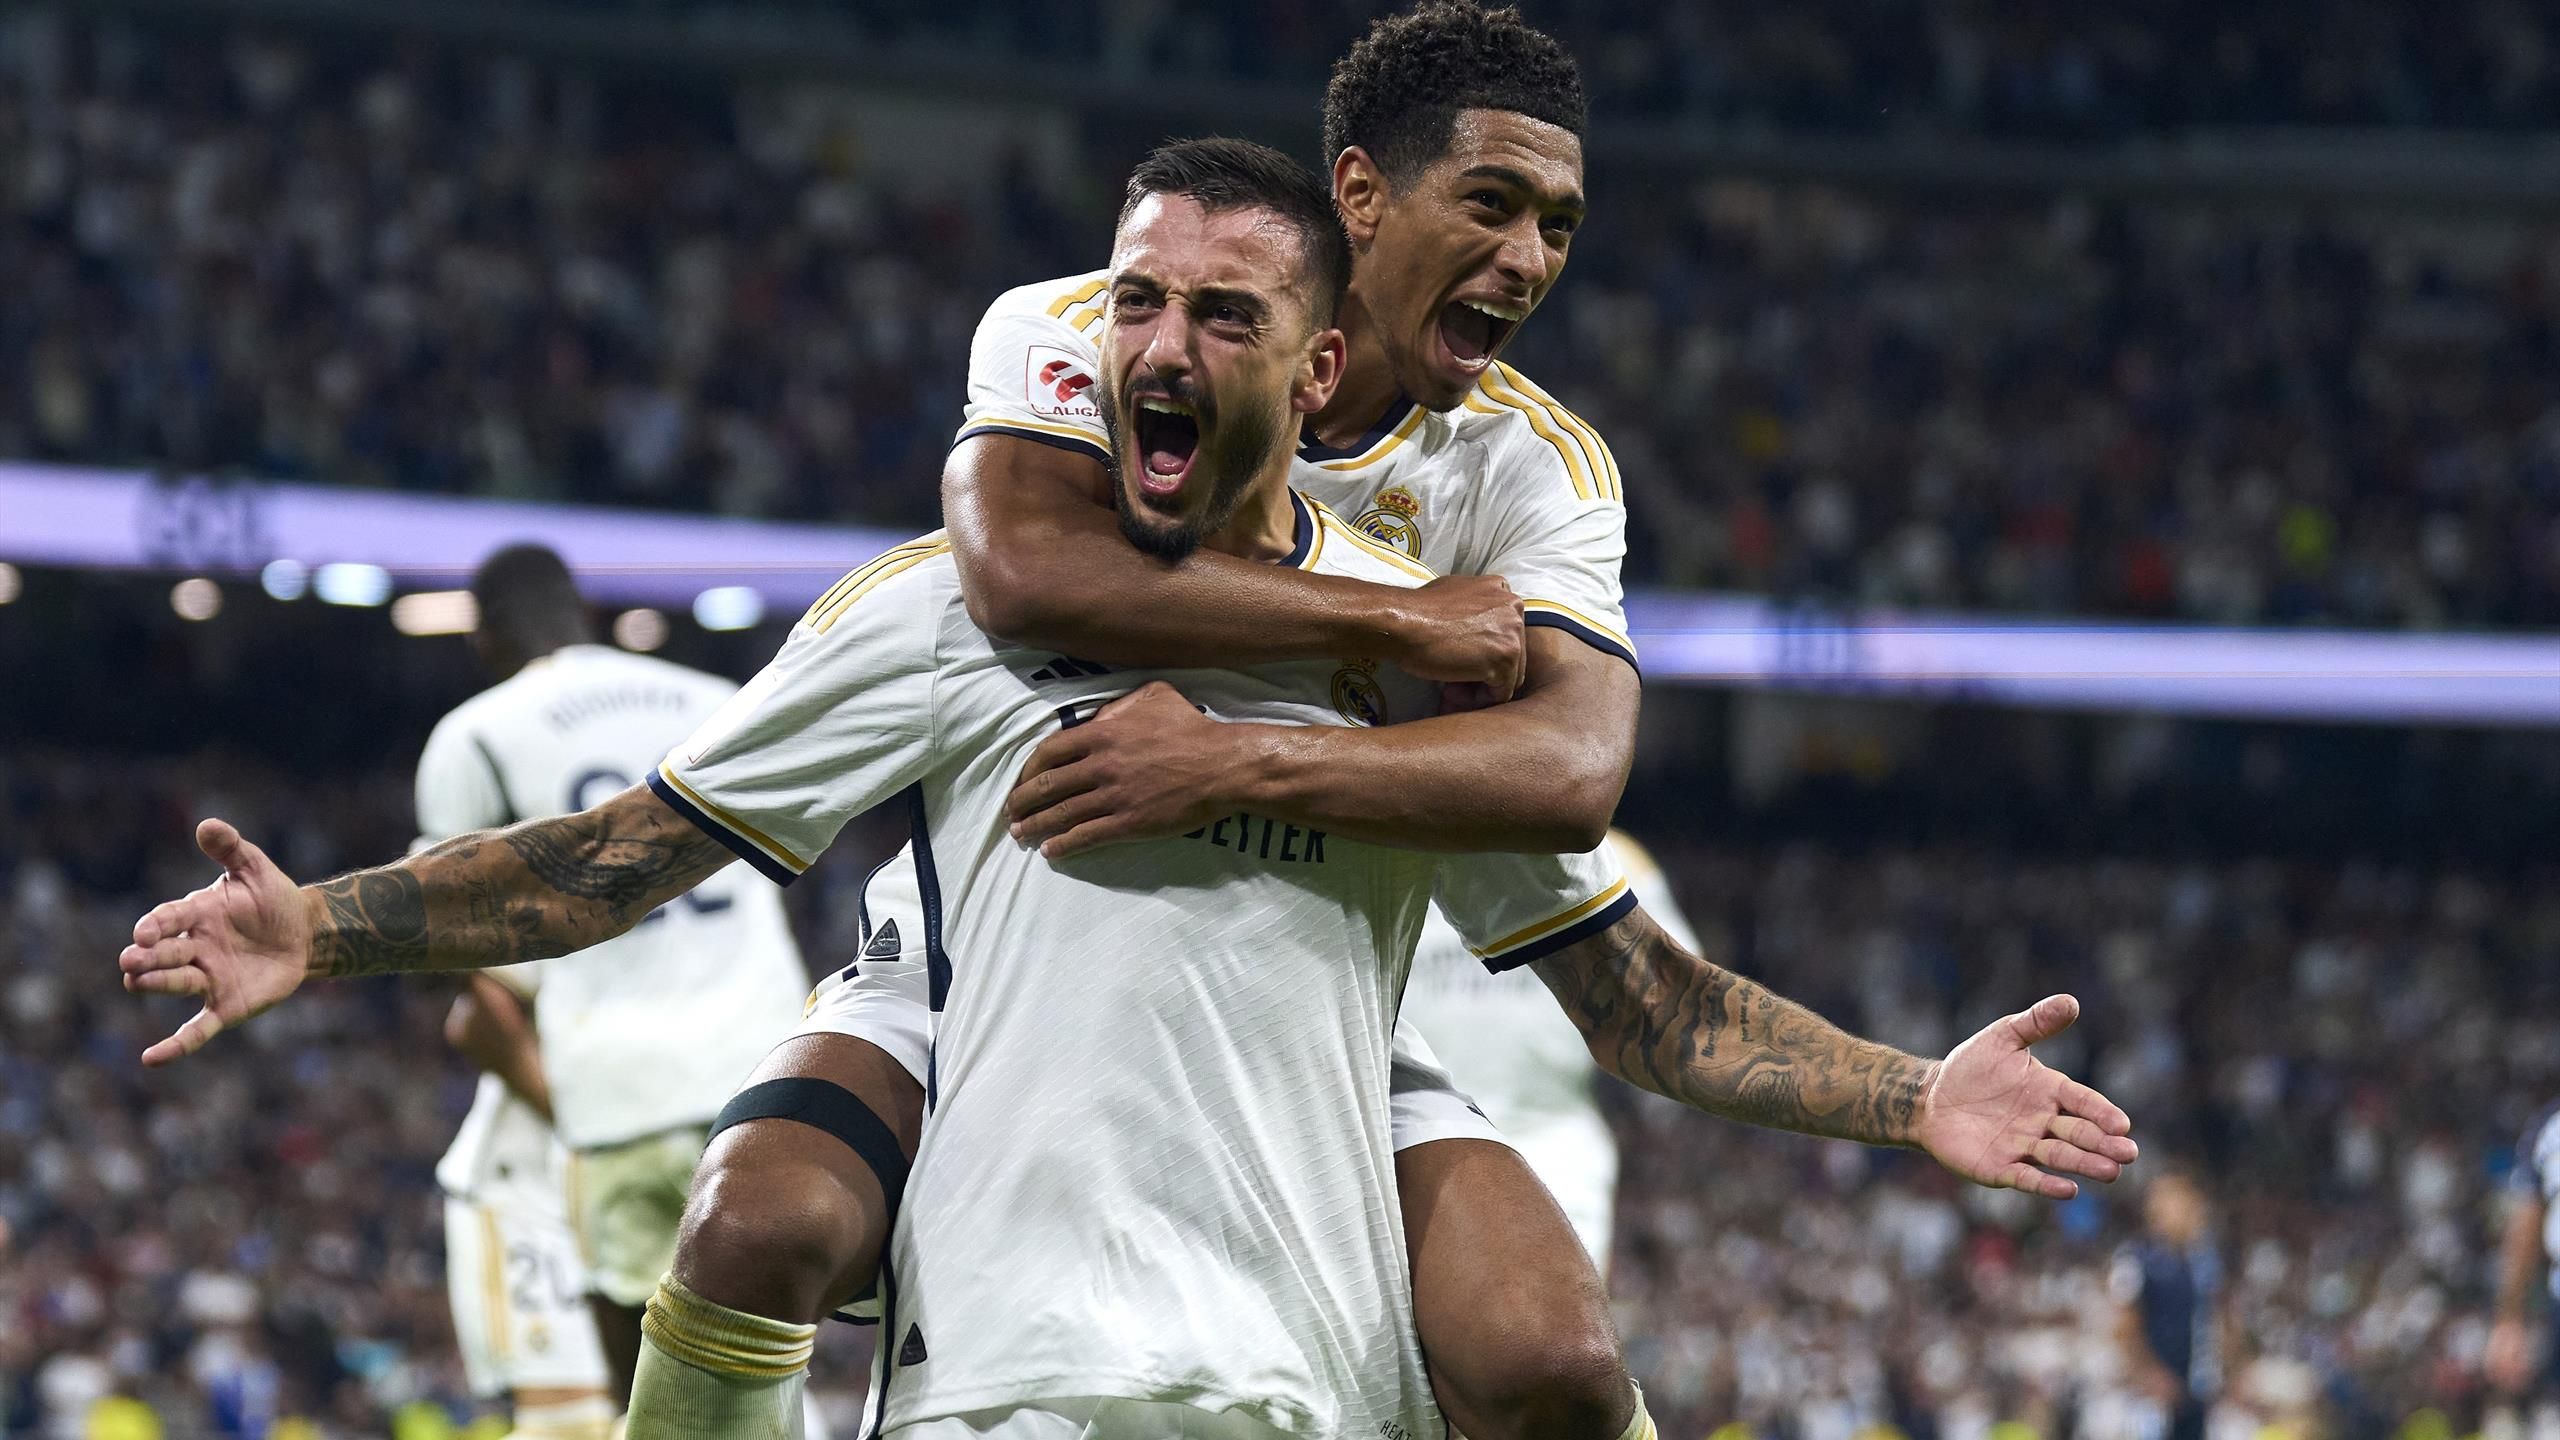 Real Madrid 2-1 Real Sociedad Carlo Ancelottis side fight back to claim win and remain perfect in La Liga